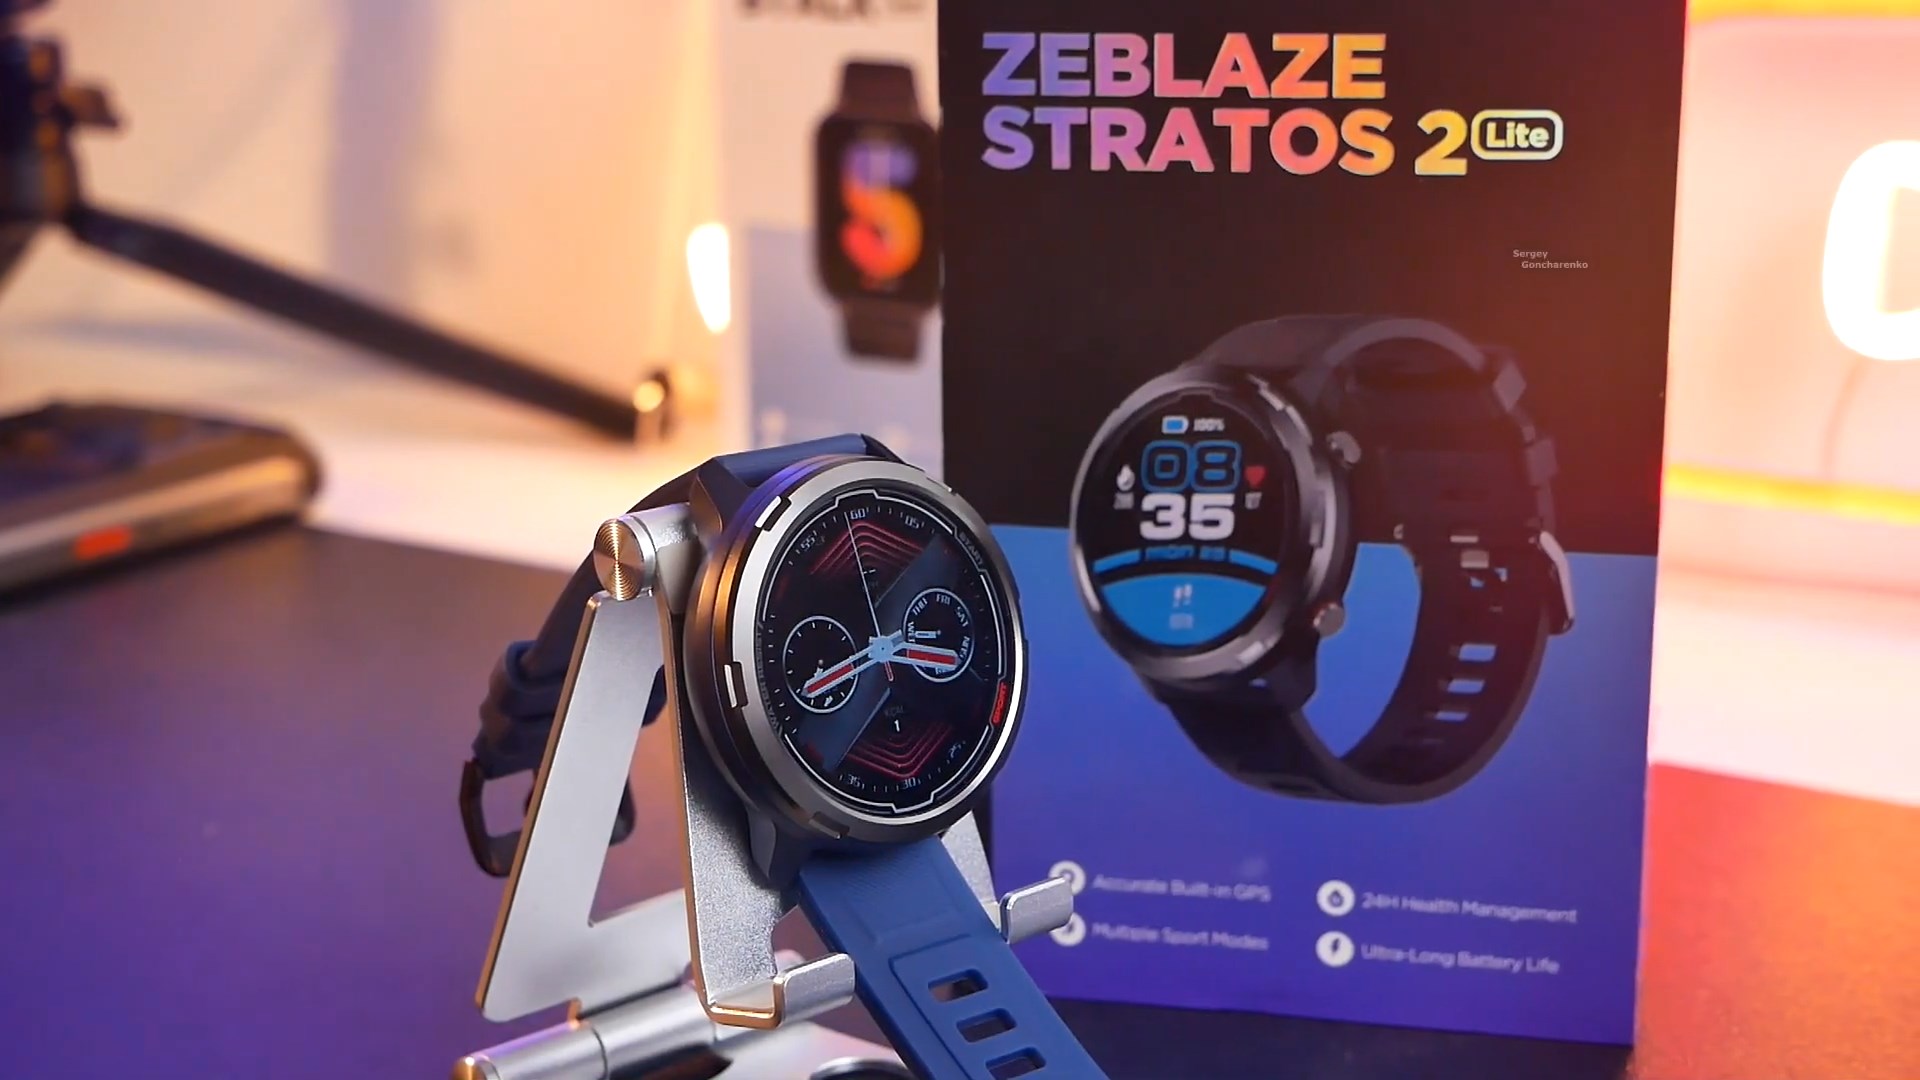 Zeblaze Stratos 2 Lite Outdoor Smartwatch with Built-in GPS & Compass and 5 ATM